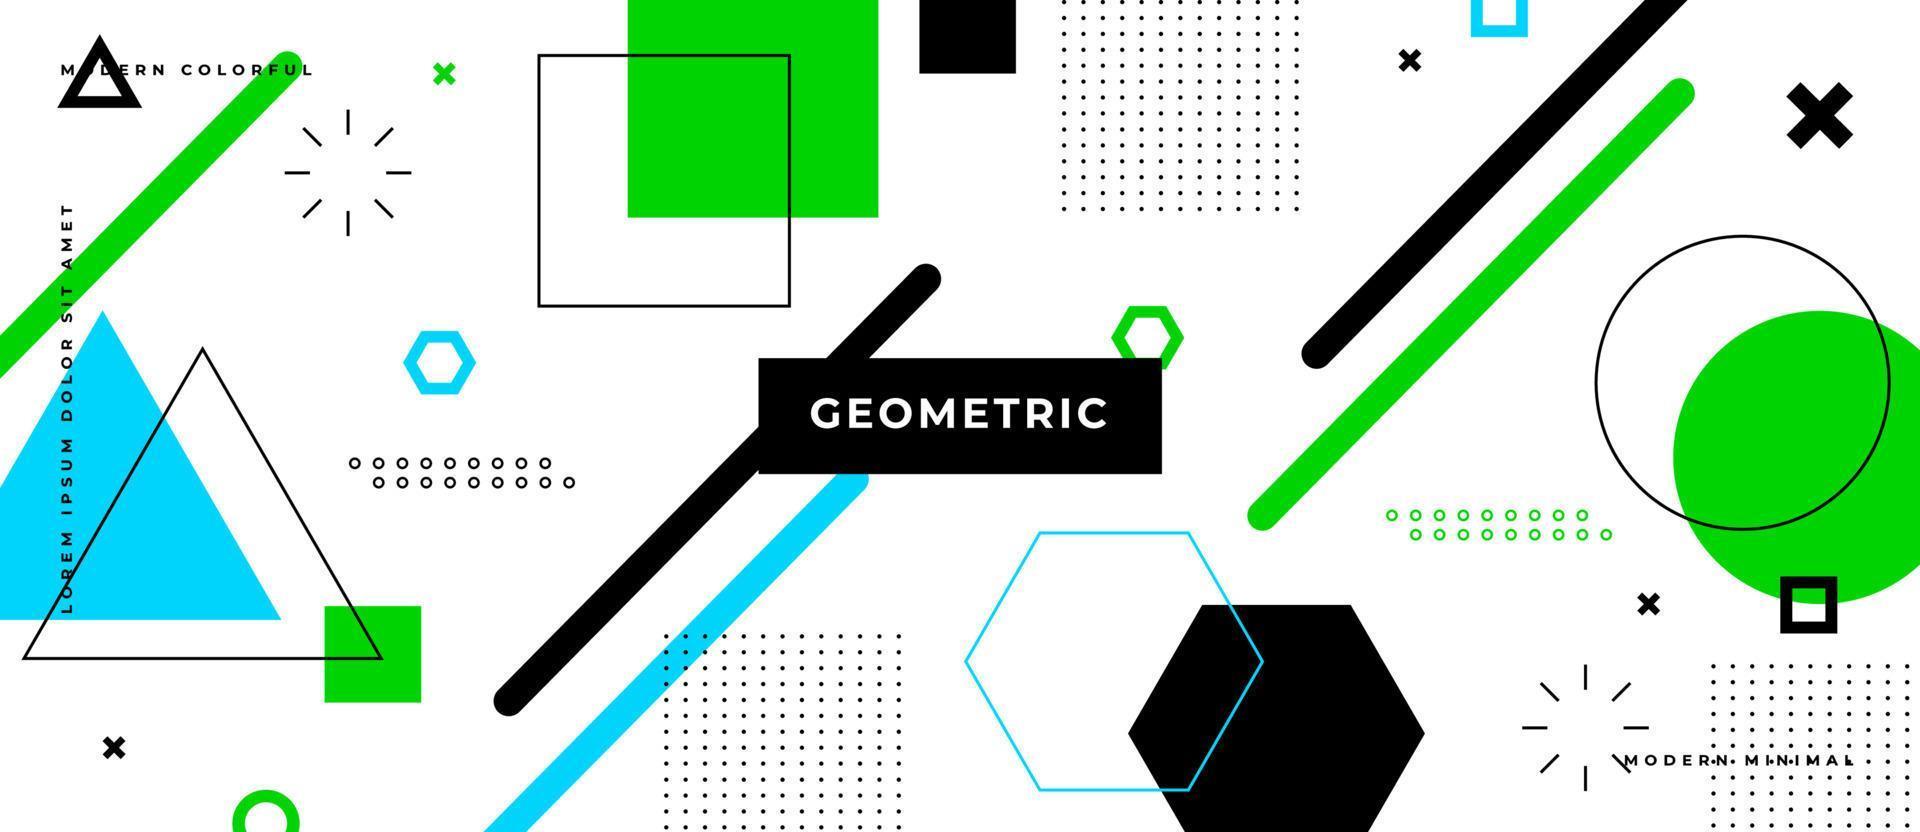 Abstract background, memphis style with different geometric shapes illustration. vector